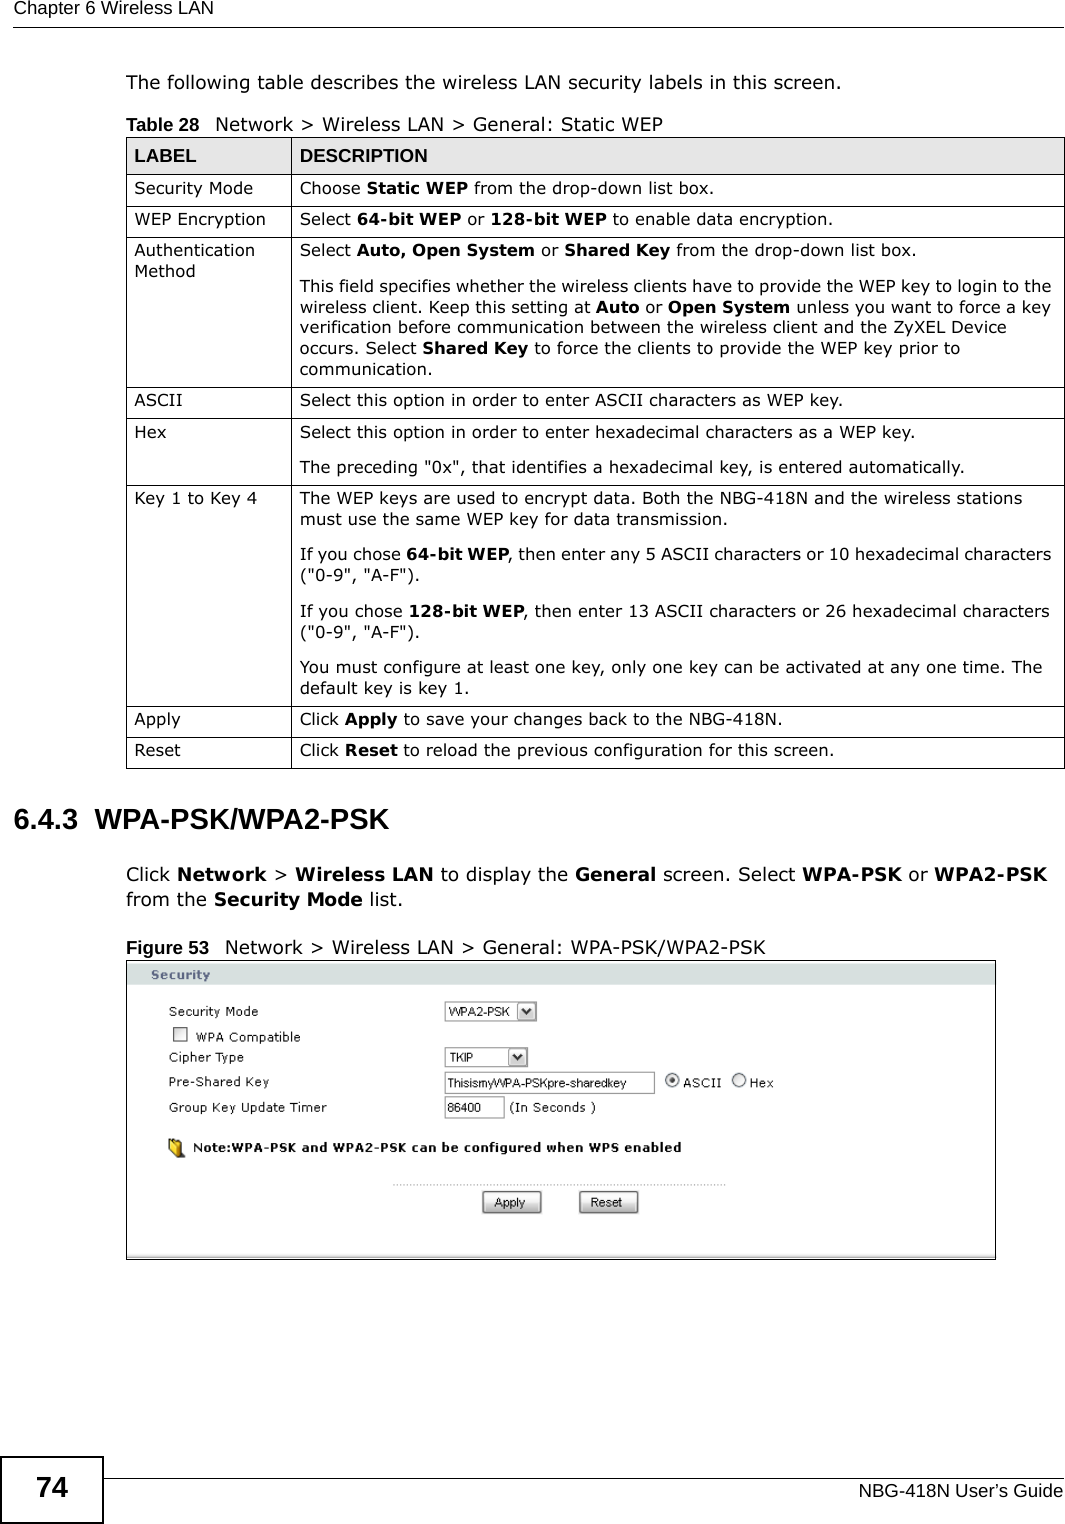 Chapter 6 Wireless LANNBG-418N User’s Guide74The following table describes the wireless LAN security labels in this screen.6.4.3  WPA-PSK/WPA2-PSKClick Network &gt; Wireless LAN to display the General screen. Select WPA-PSK or WPA2-PSK from the Security Mode list.Figure 53   Network &gt; Wireless LAN &gt; General: WPA-PSK/WPA2-PSKTable 28   Network &gt; Wireless LAN &gt; General: Static WEPLABEL DESCRIPTIONSecurity Mode Choose Static WEP from the drop-down list box.WEP Encryption Select 64-bit WEP or 128-bit WEP to enable data encryption.Authentication MethodSelect Auto, Open System or Shared Key from the drop-down list box.This field specifies whether the wireless clients have to provide the WEP key to login to the wireless client. Keep this setting at Auto or Open System unless you want to force a key verification before communication between the wireless client and the ZyXEL Device occurs. Select Shared Key to force the clients to provide the WEP key prior to communication. ASCII Select this option in order to enter ASCII characters as WEP key. Hex Select this option in order to enter hexadecimal characters as a WEP key. The preceding &quot;0x&quot;, that identifies a hexadecimal key, is entered automatically.Key 1 to Key 4 The WEP keys are used to encrypt data. Both the NBG-418N and the wireless stations must use the same WEP key for data transmission.If you chose 64-bit WEP, then enter any 5 ASCII characters or 10 hexadecimal characters (&quot;0-9&quot;, &quot;A-F&quot;).If you chose 128-bit WEP, then enter 13 ASCII characters or 26 hexadecimal characters (&quot;0-9&quot;, &quot;A-F&quot;). You must configure at least one key, only one key can be activated at any one time. The default key is key 1.Apply Click Apply to save your changes back to the NBG-418N.Reset Click Reset to reload the previous configuration for this screen.